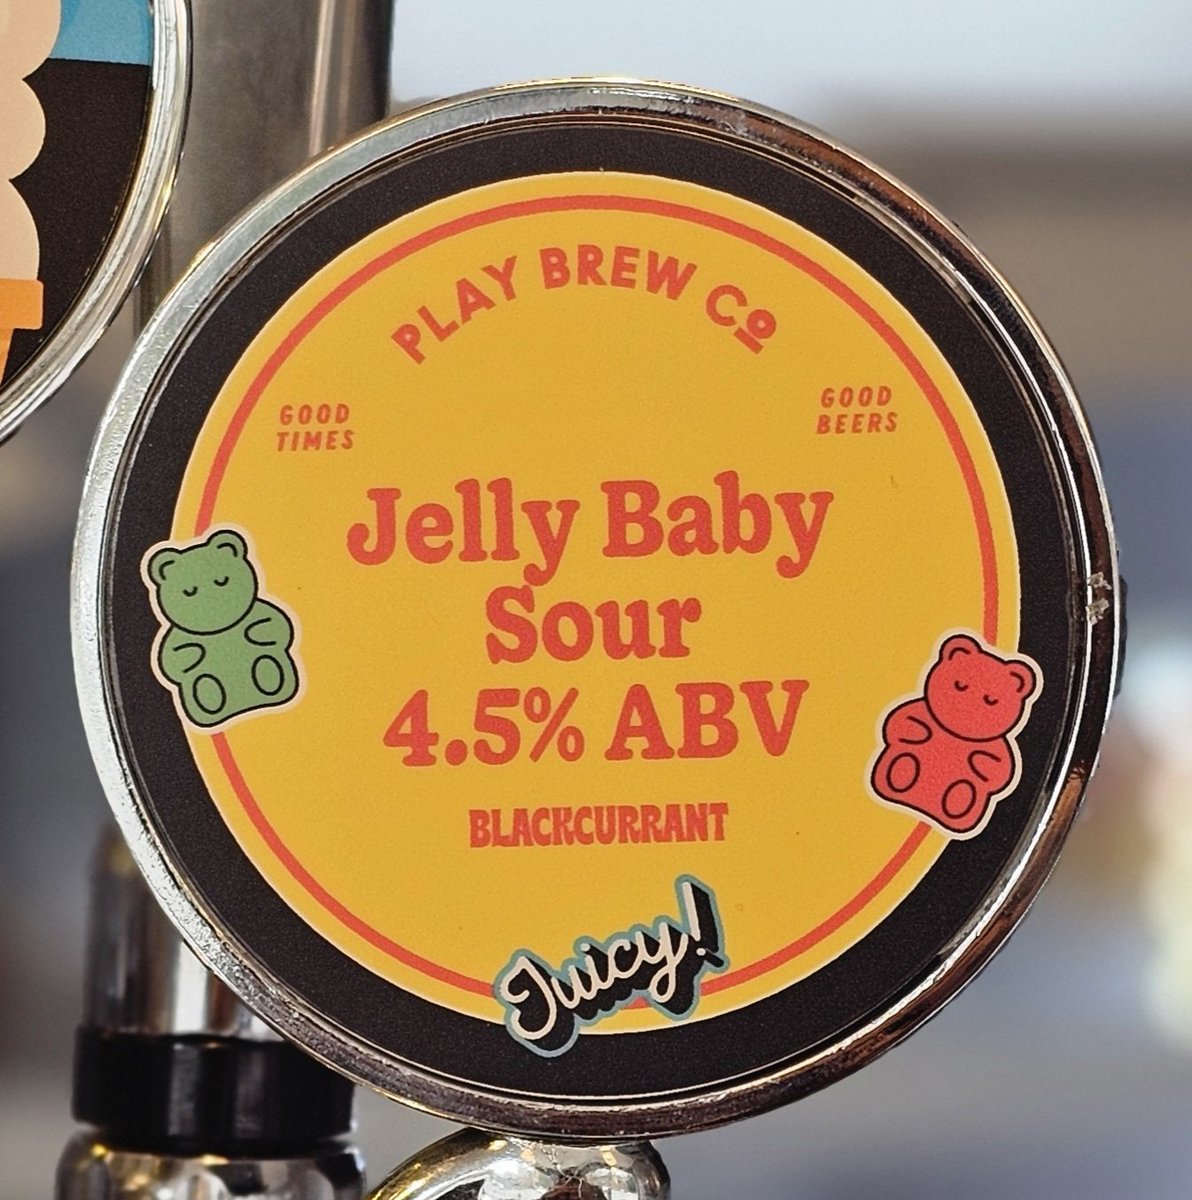 🍺 FRESH BEER 🍺 @PlayBrewCo Jelly Baby Sour View all the beers on tap now & coming soon, visit our website (link in bio). #craftbeer #aigburth #vegan